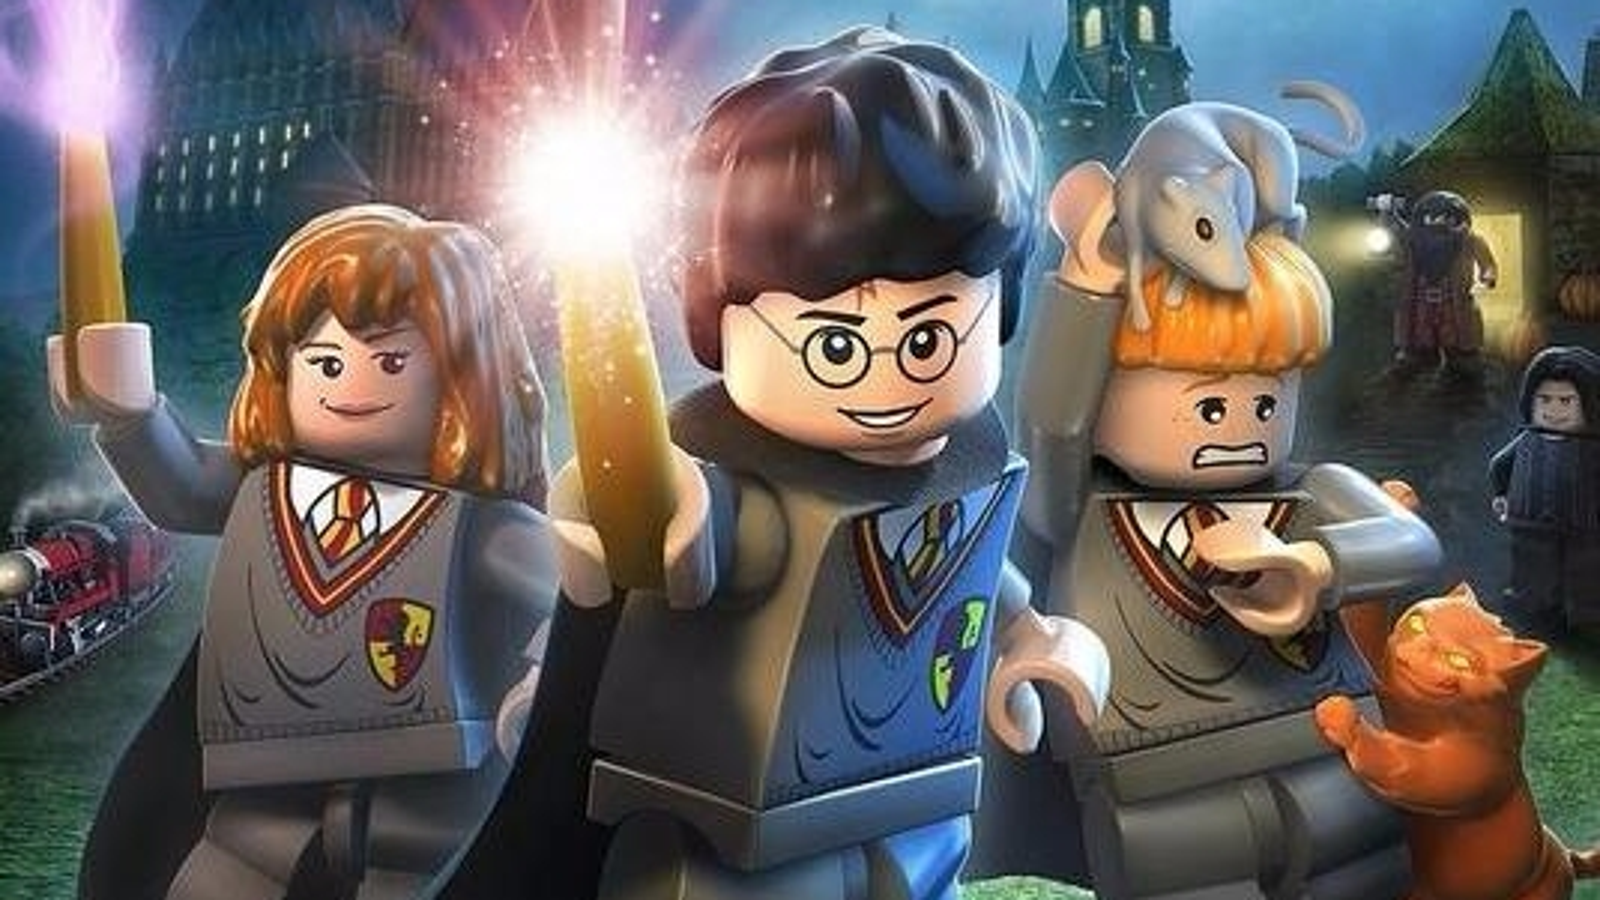 Harry Potter cheats - Full codes list for Years 1-4, Years on PS4, Switch, Xbox One, PS3, Xbox 360, Wii, PC | Eurogamer.net